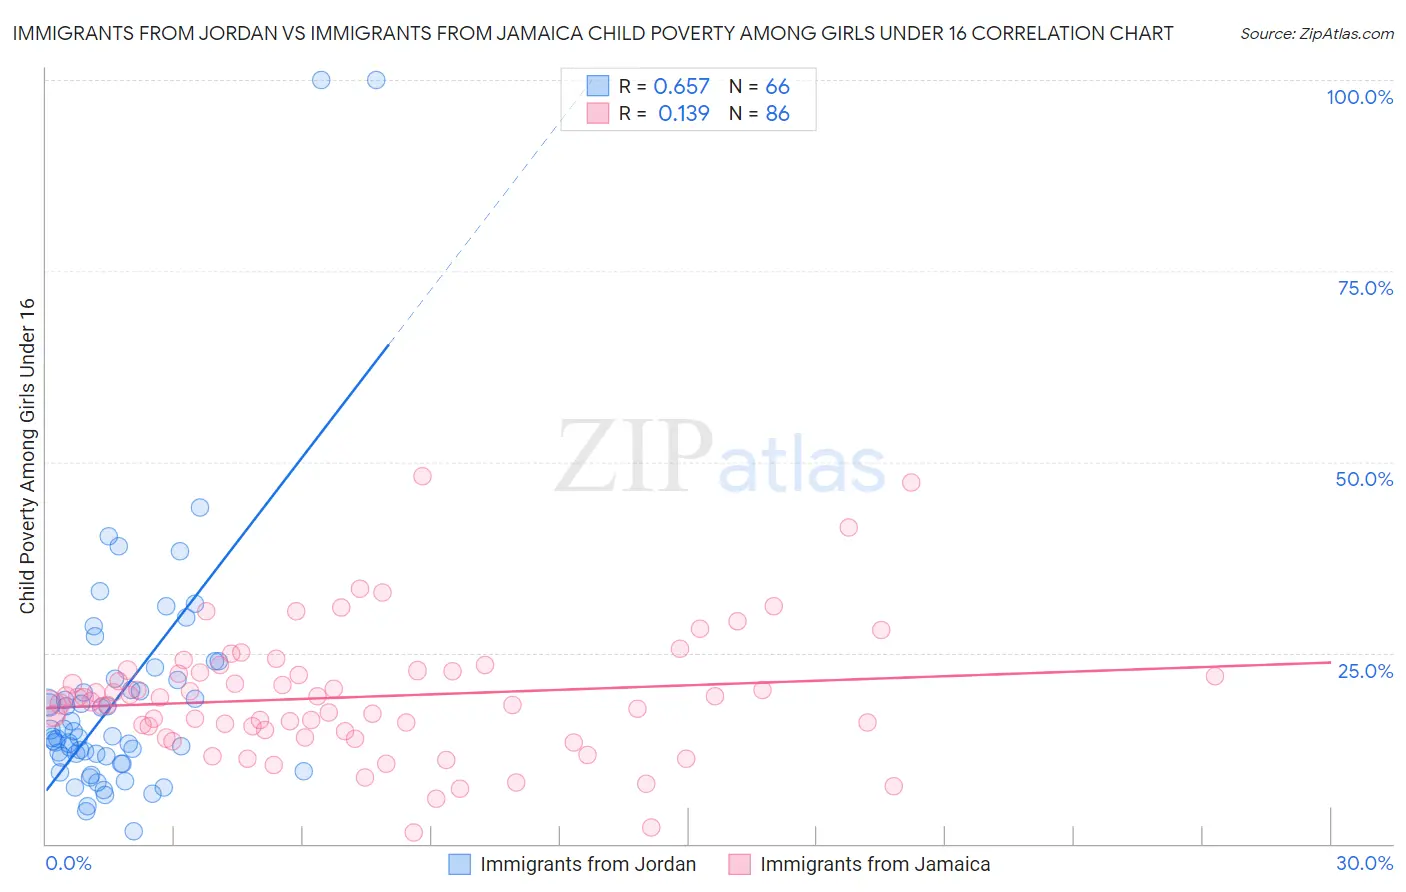 Immigrants from Jordan vs Immigrants from Jamaica Child Poverty Among Girls Under 16